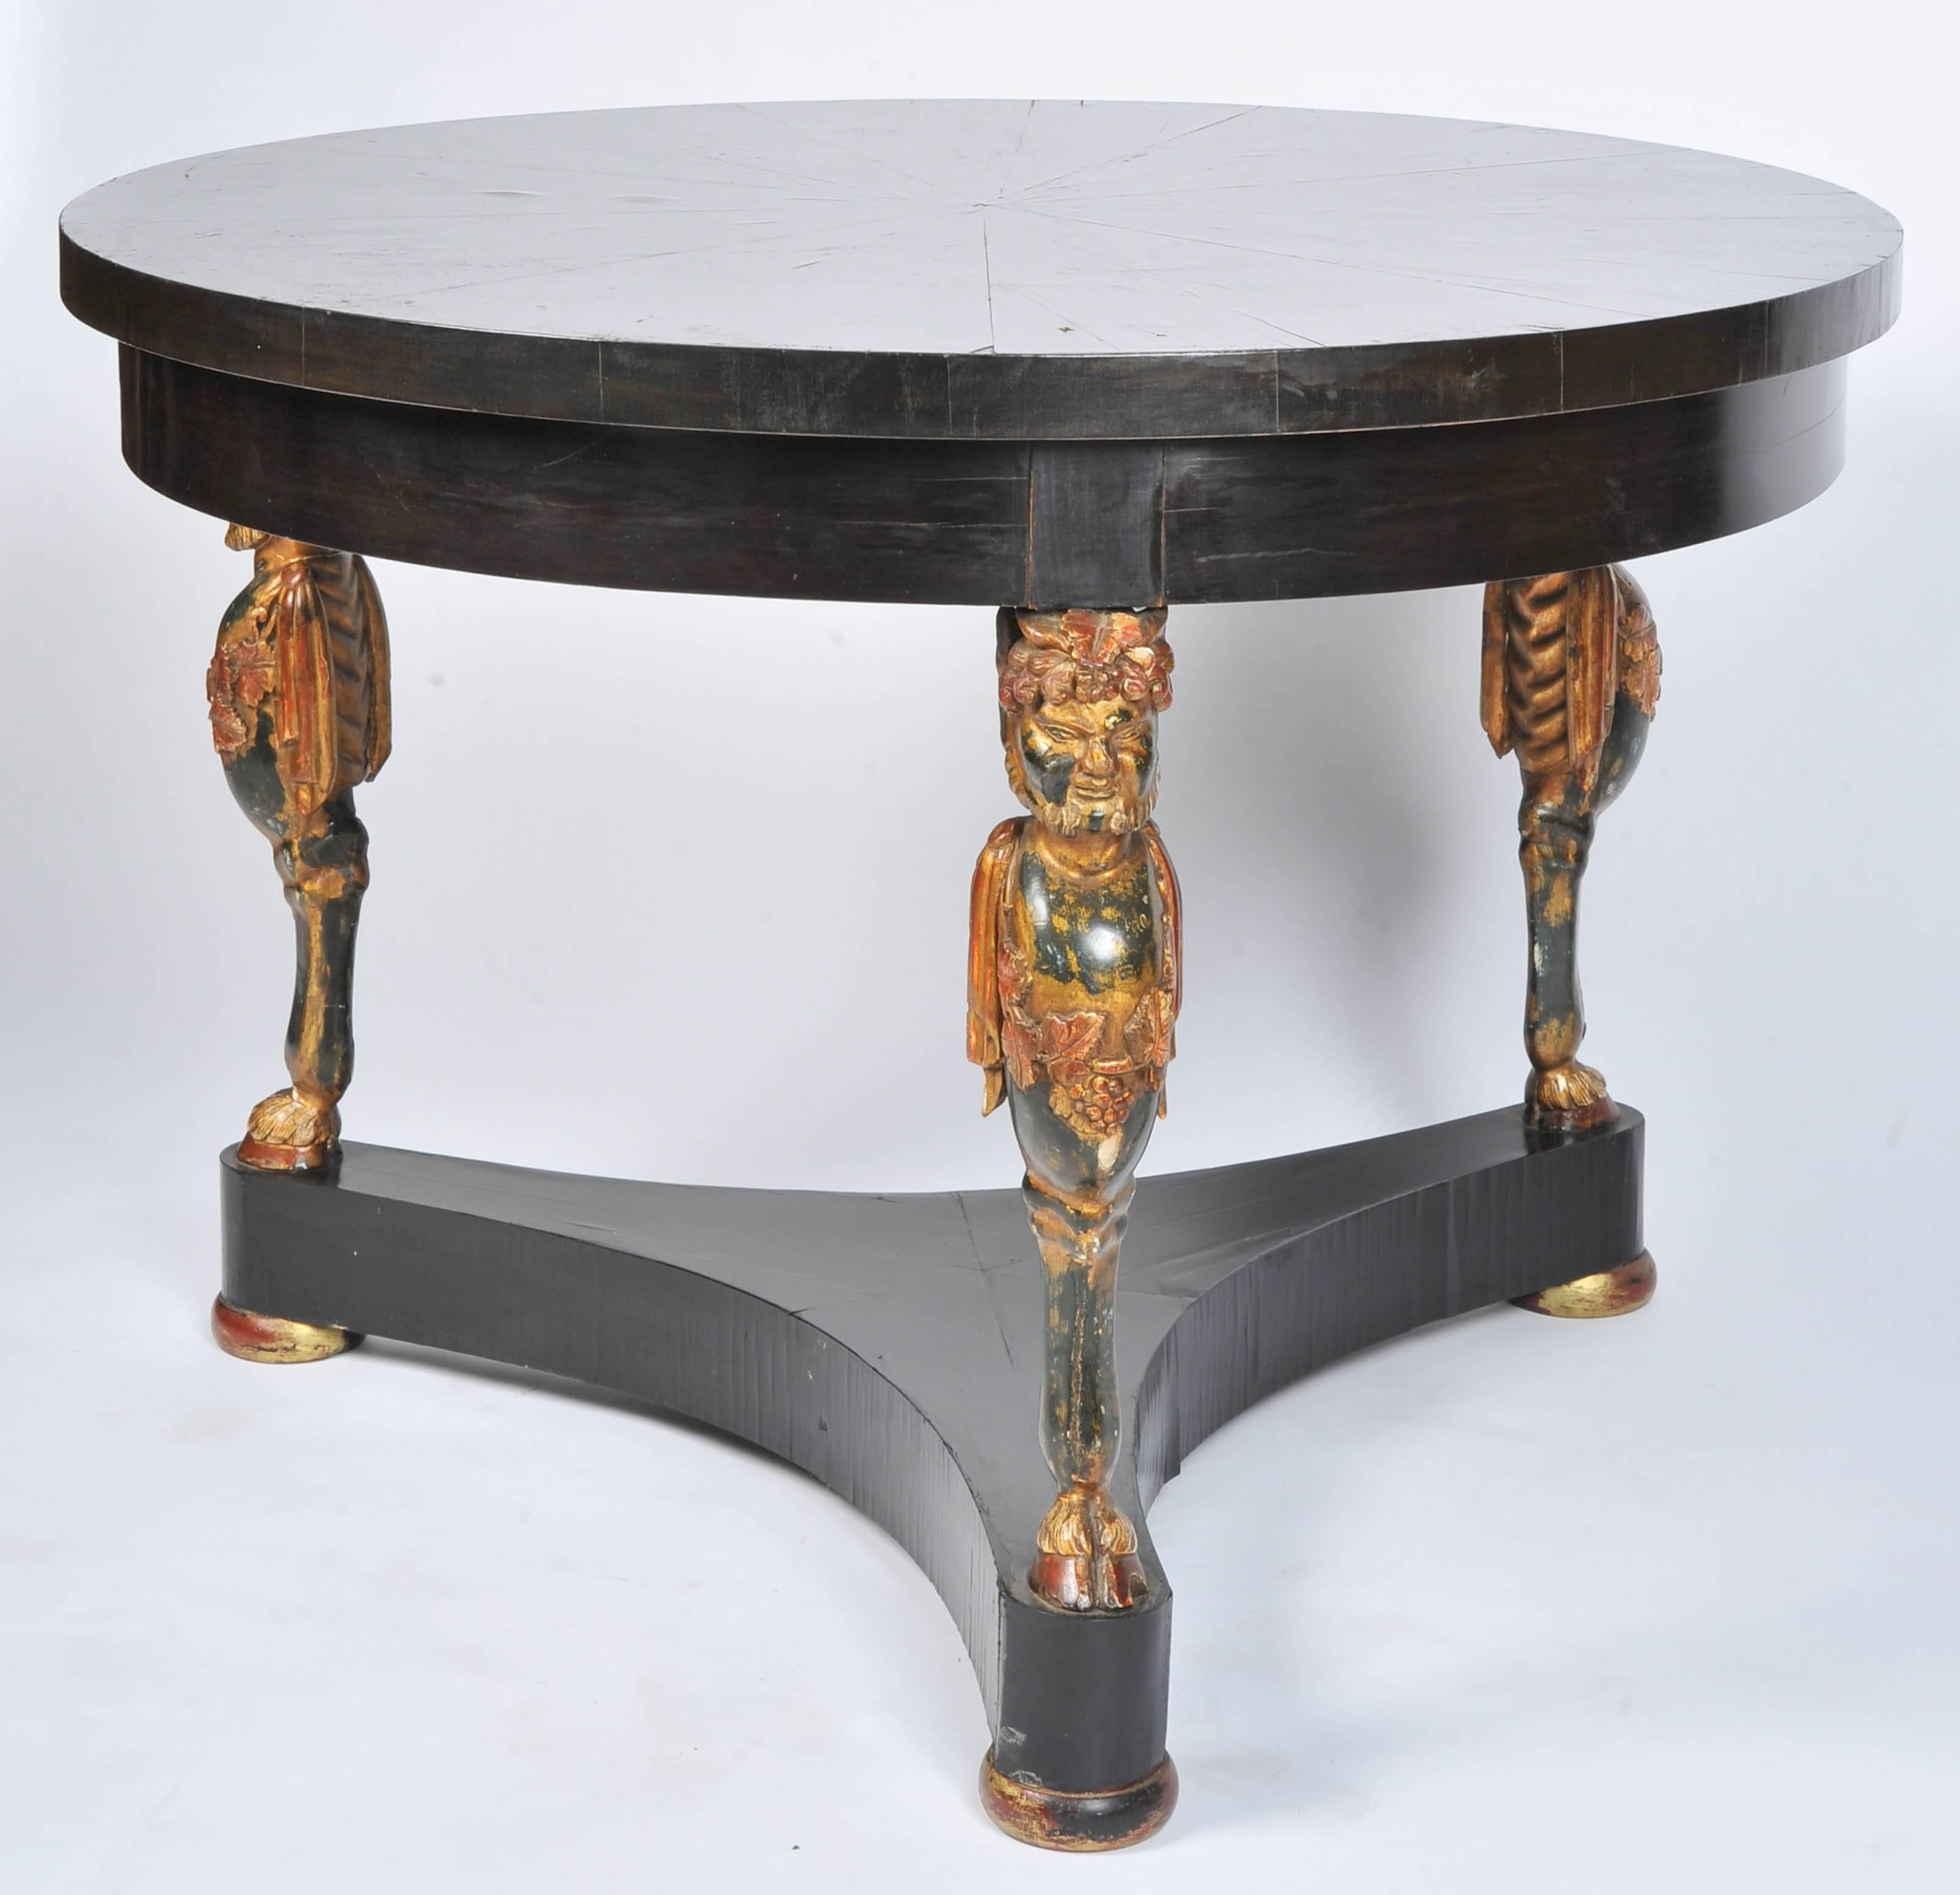 A very striking French early 19th century ebony and carved giltwood gueridon centre table. Having radiating veneers on the table top. Monopodia carved giltwood supports, raised on a triform ebony veneered base.